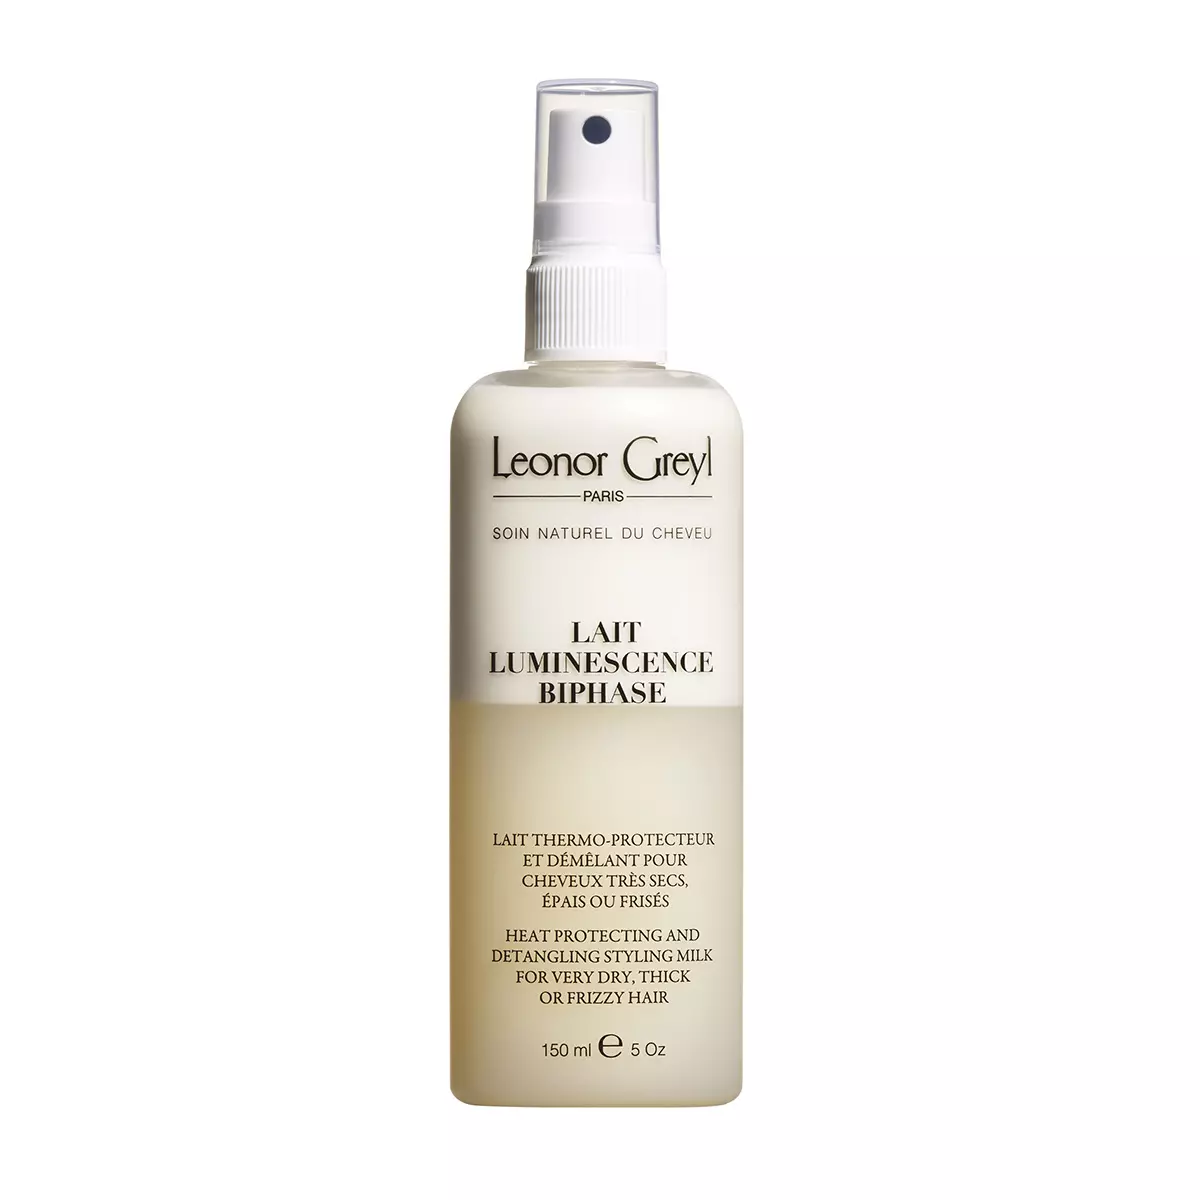 Leonor Greyl Paris Lait Luminiscence Bi-Phase- Detangling and Heat Protecting Spray for Dry and Thick Hair, 5.2 Oz